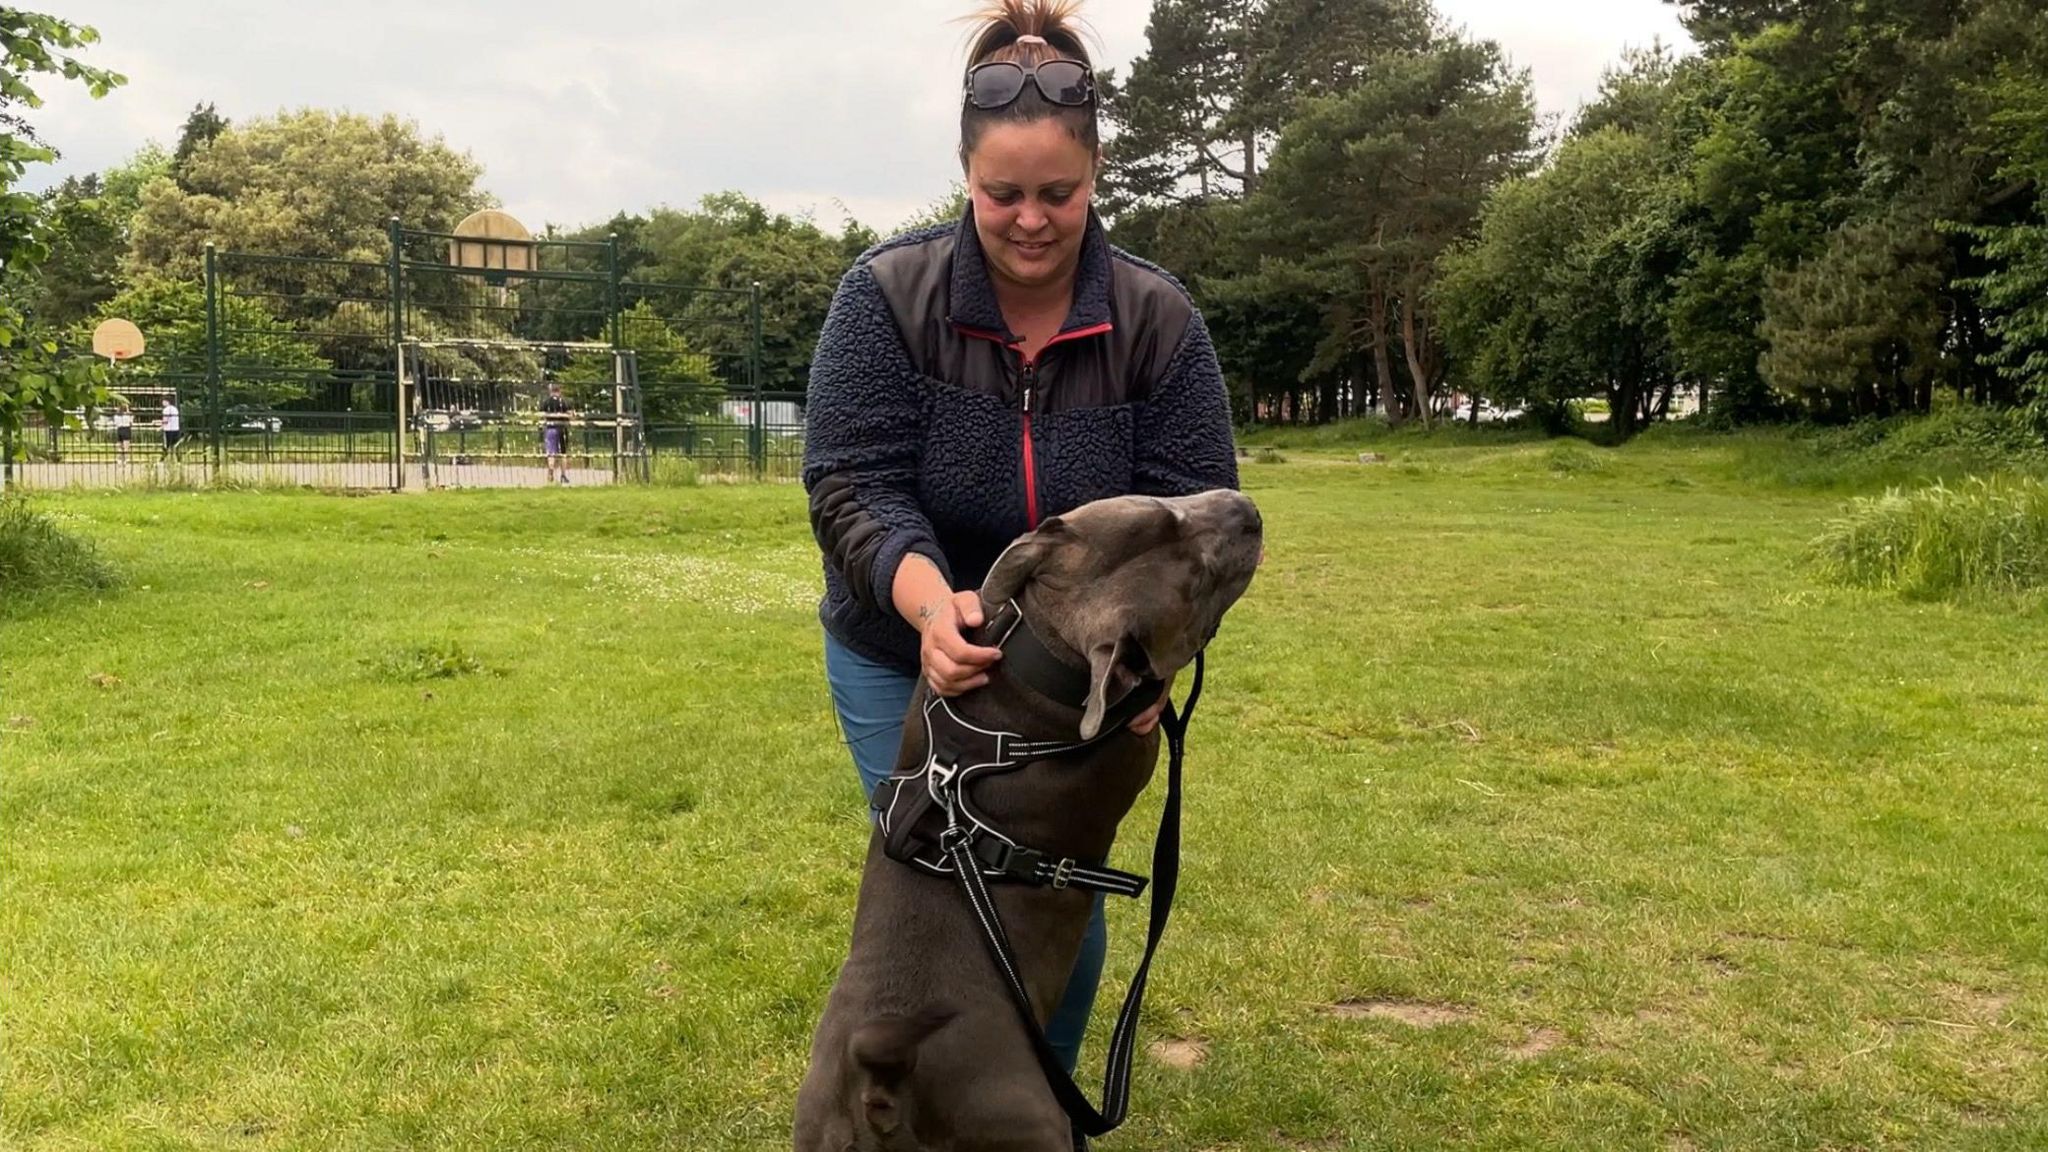 Billy the Staffordshire bull terrier jumping up on owner Stacey Jenver in a park